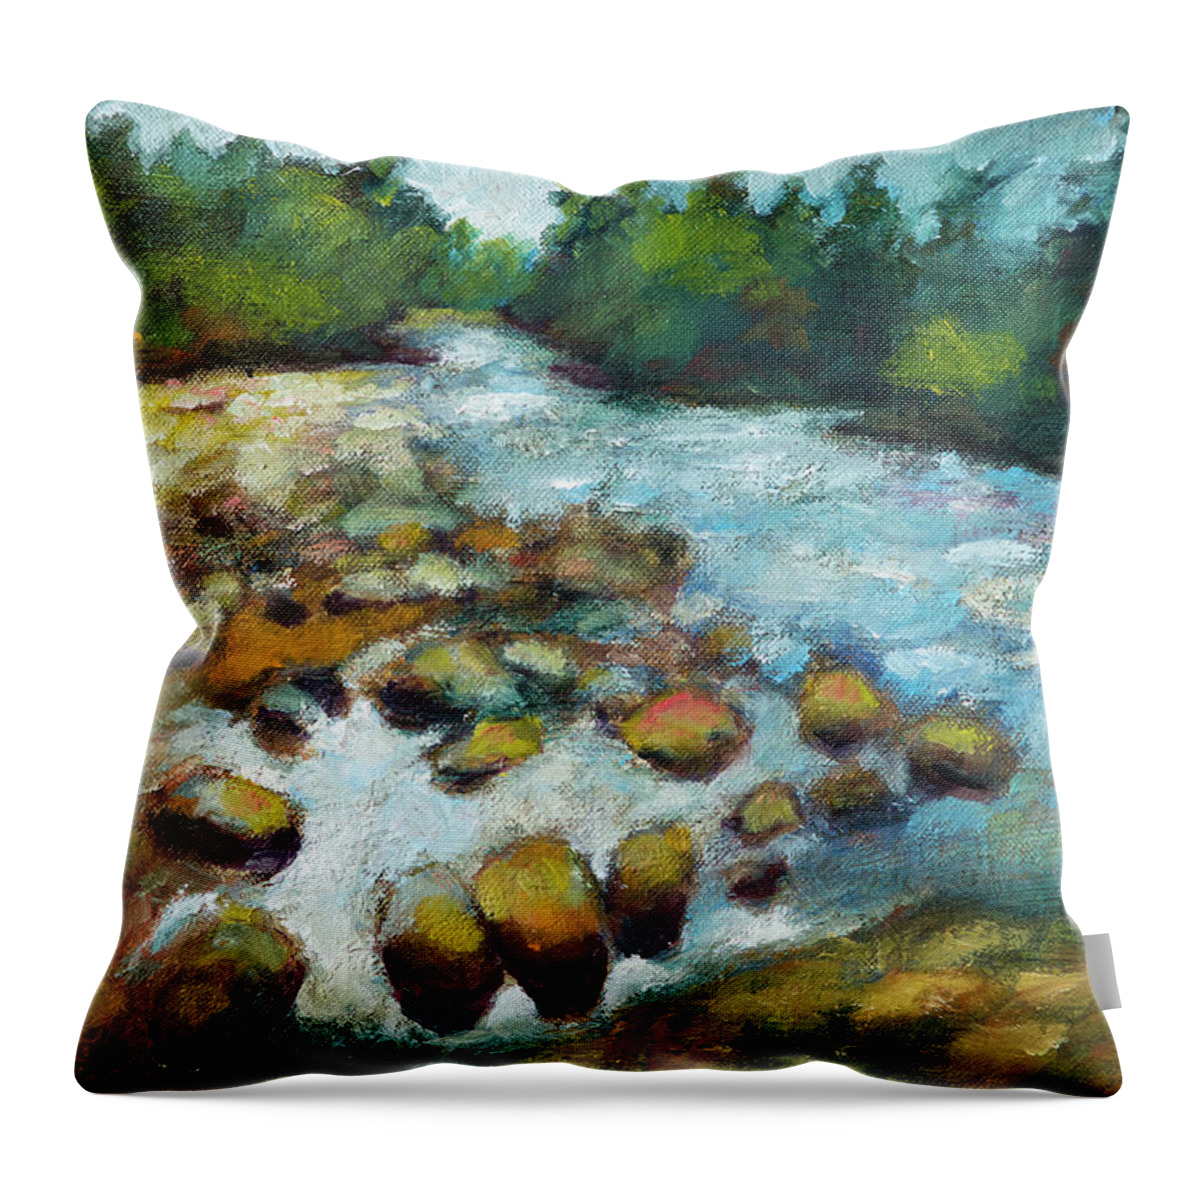 Landscape Throw Pillow featuring the painting Crabtree Creek by Mike Bergen